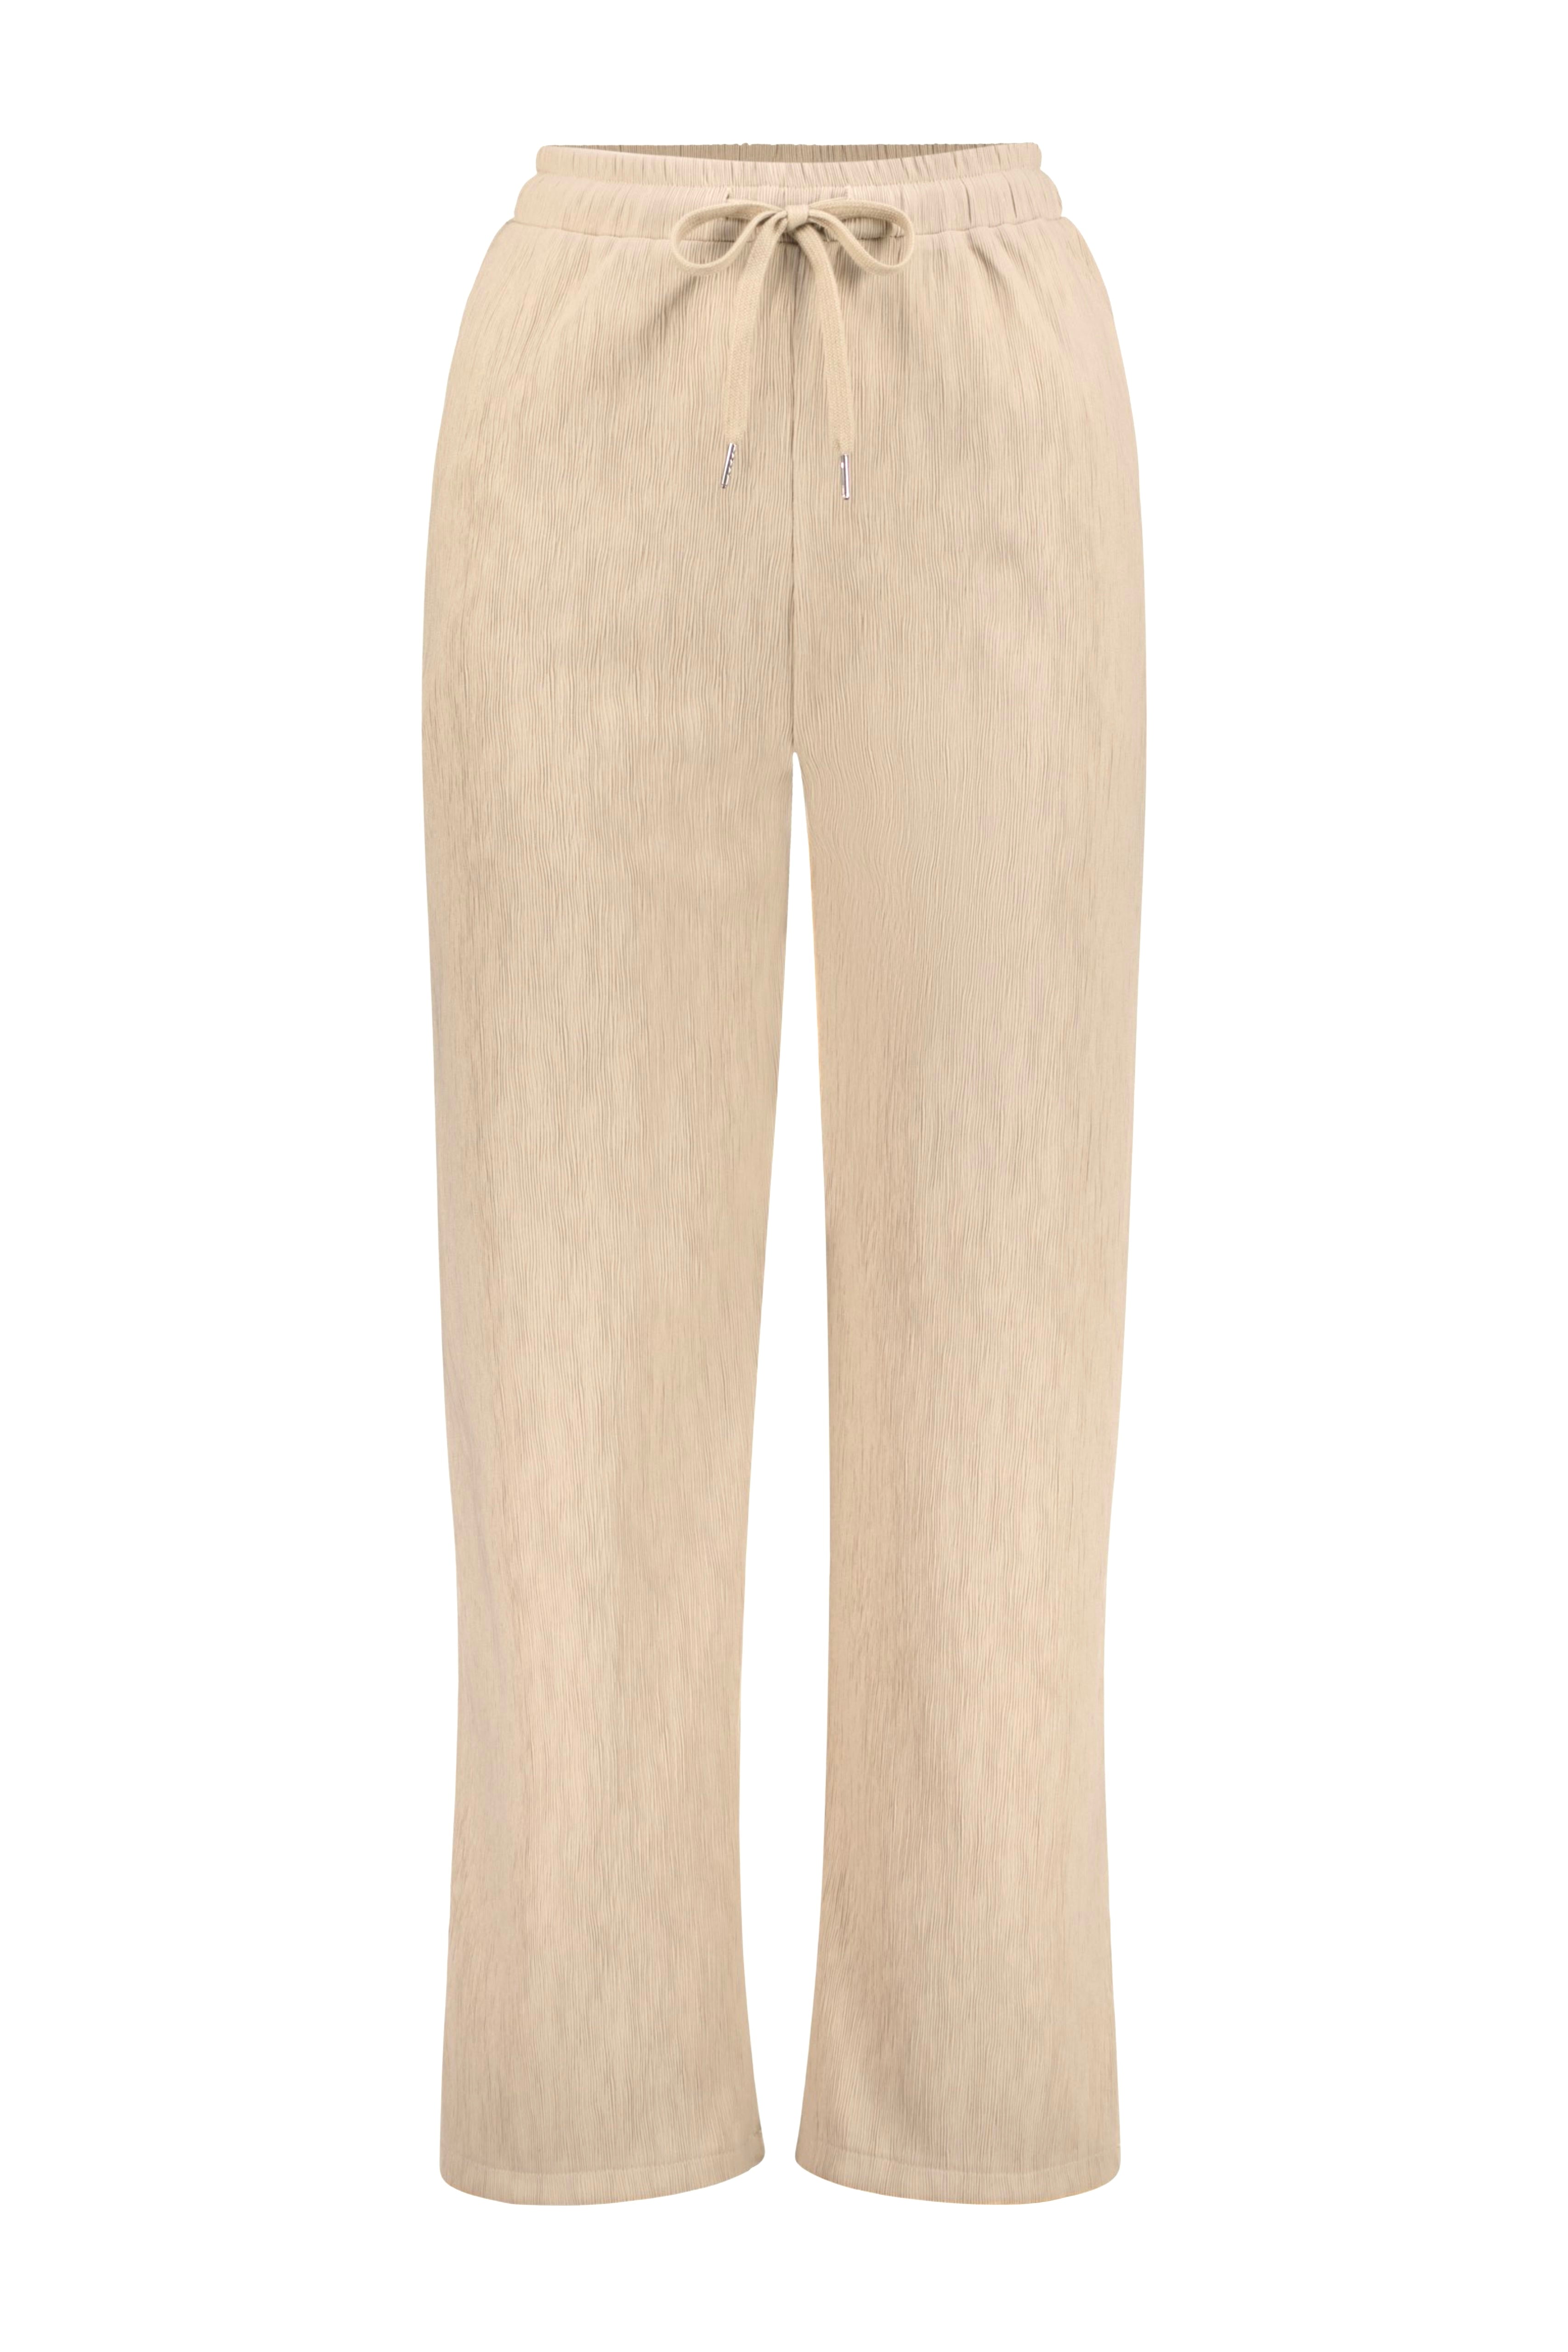 CA - Wavy Relaxed Fit Pants - Sand